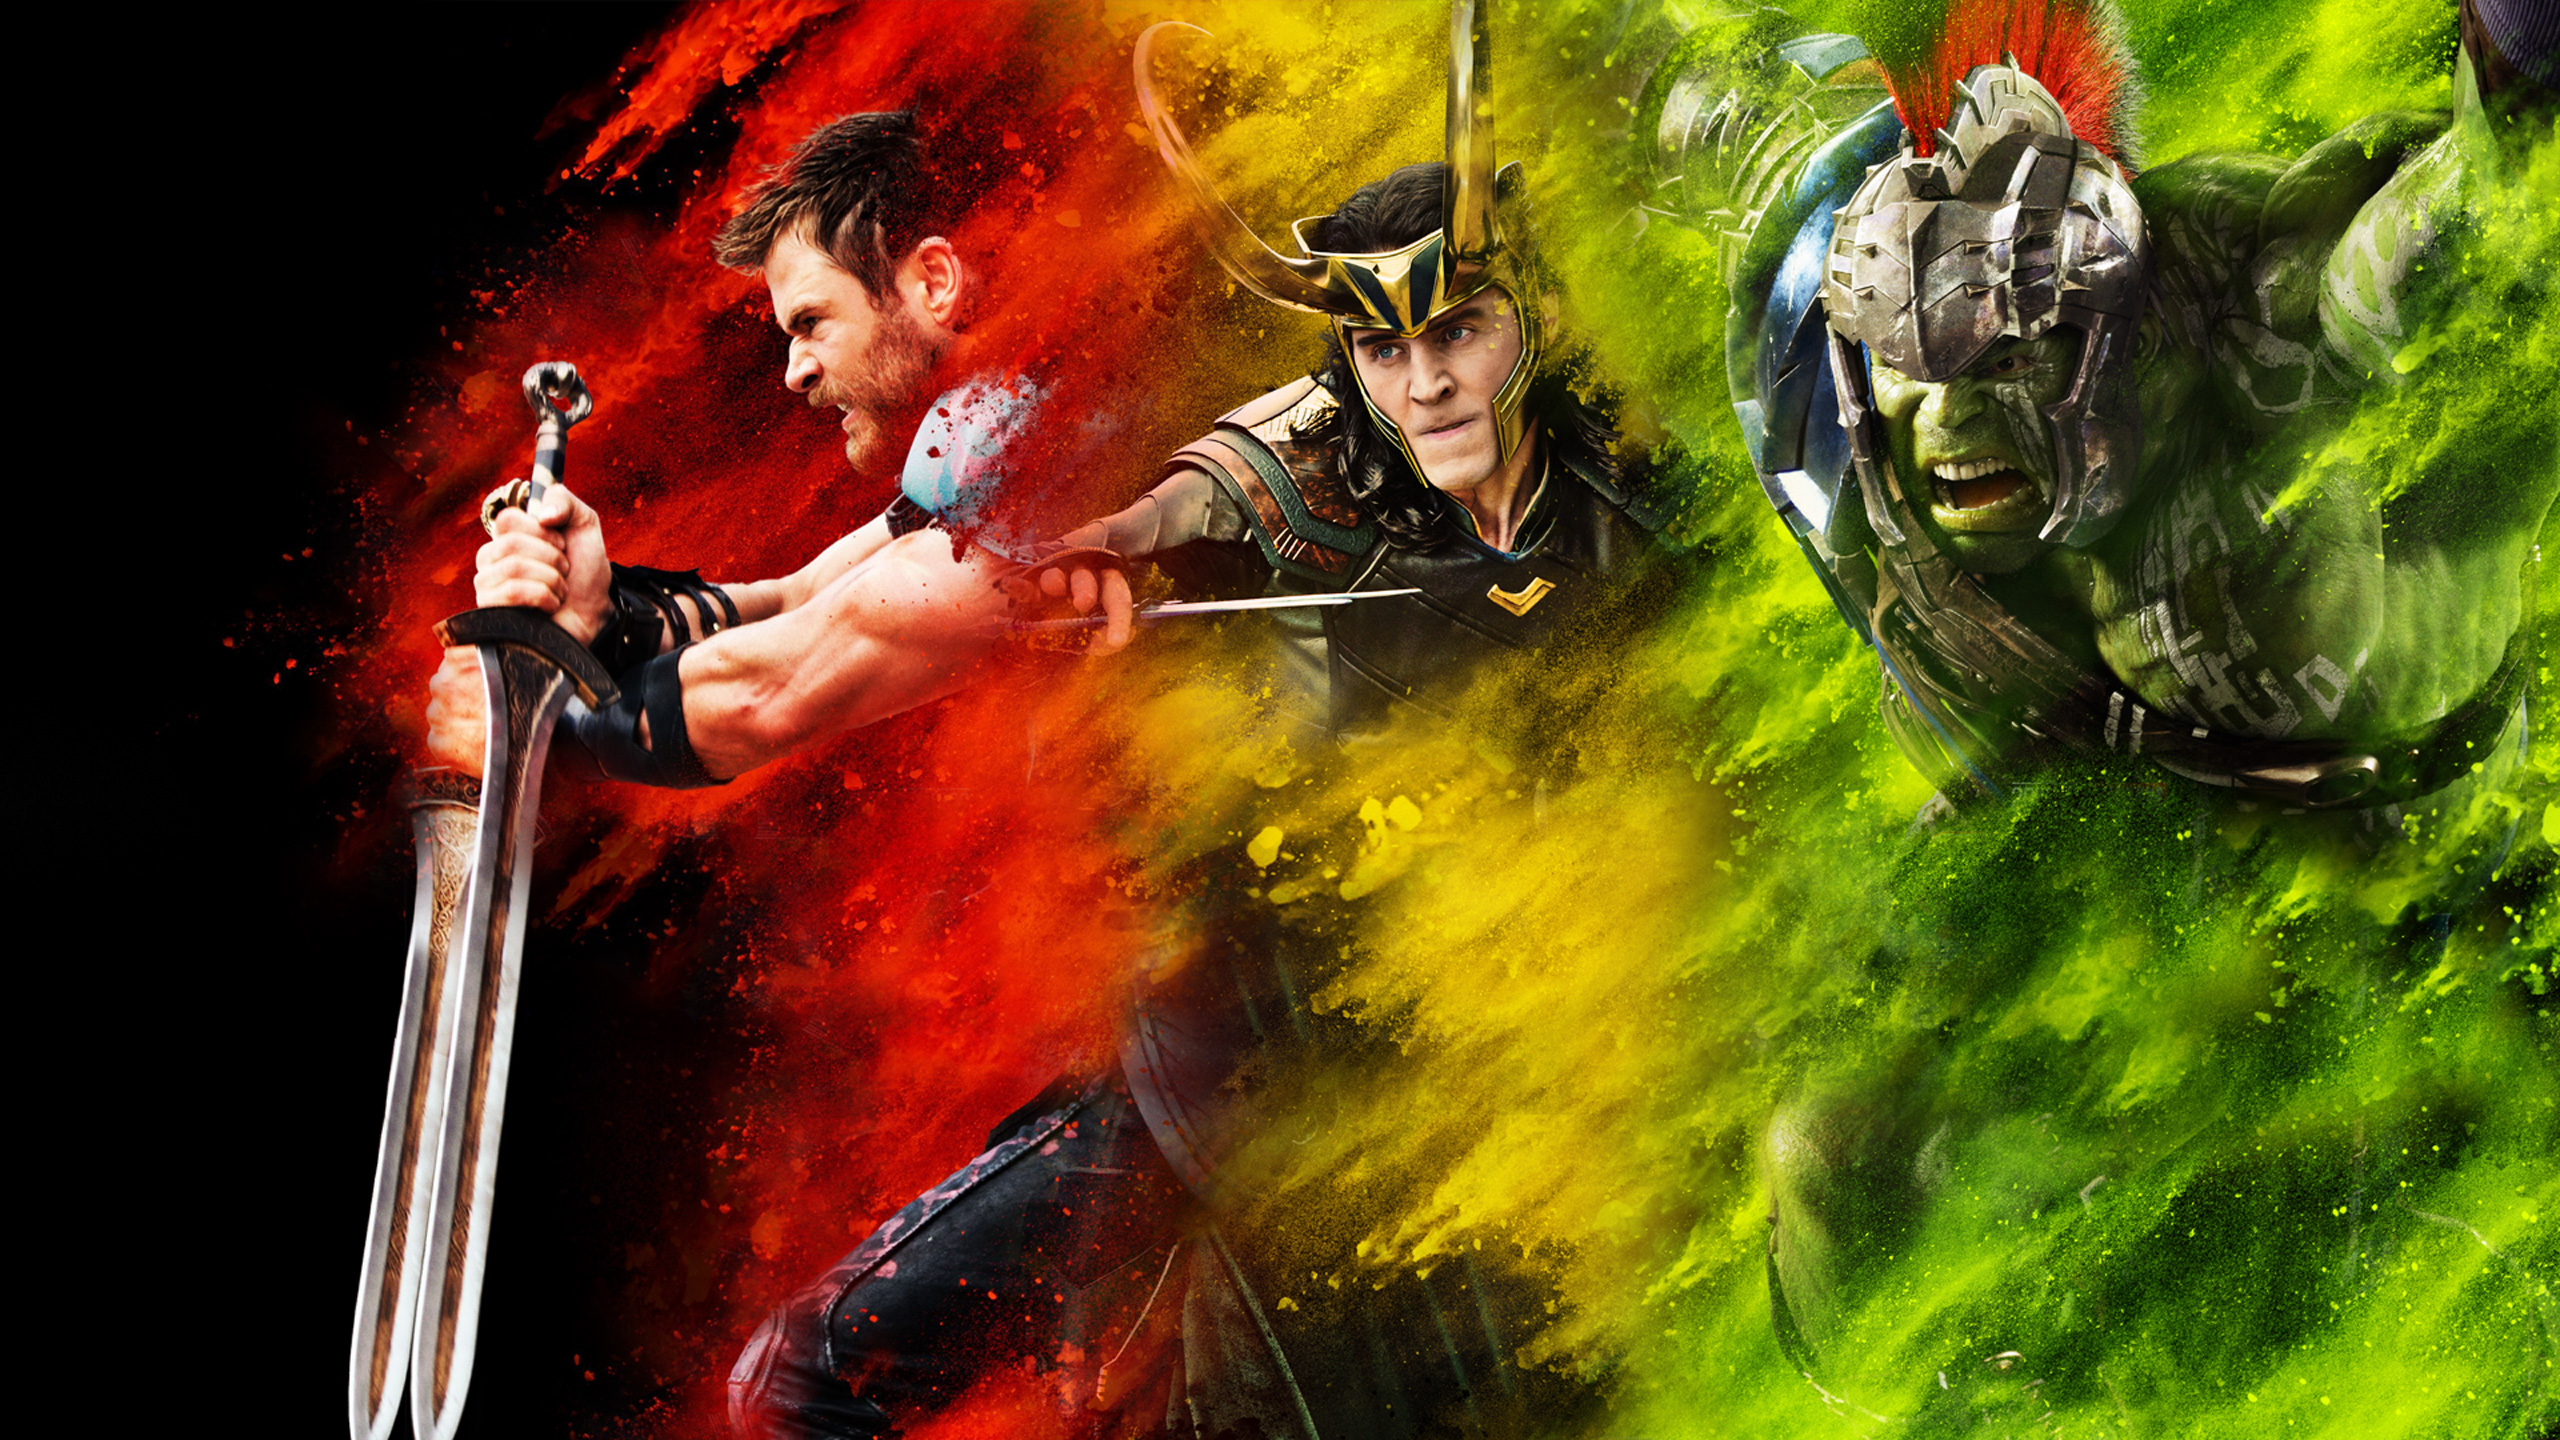 Poster Marvel Thor Ragnarok sl17568 Large Poster 36x24 Inches Banner  Media Fine Art Print  Art  Paintings posters in India  Buy art film  design movie music nature and educational paintingswallpapers